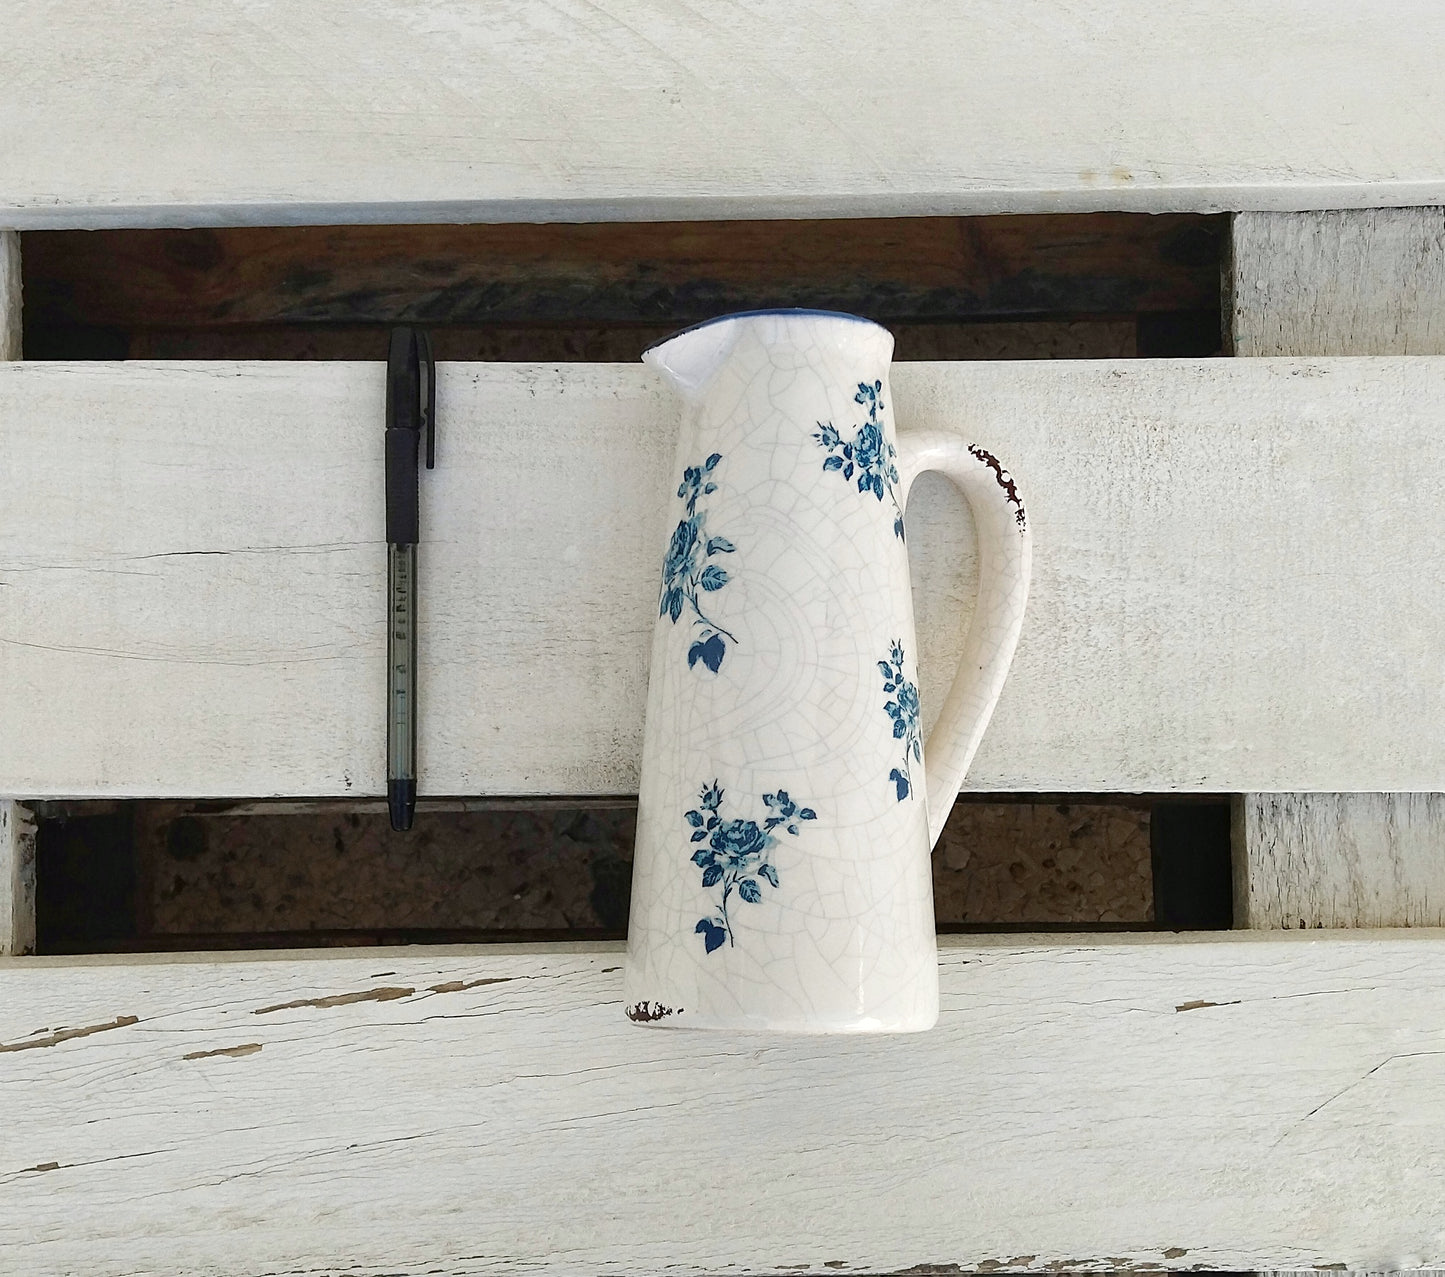 Small Ceramic Pitcher With Roses Theme, Ceramic Flower Jug